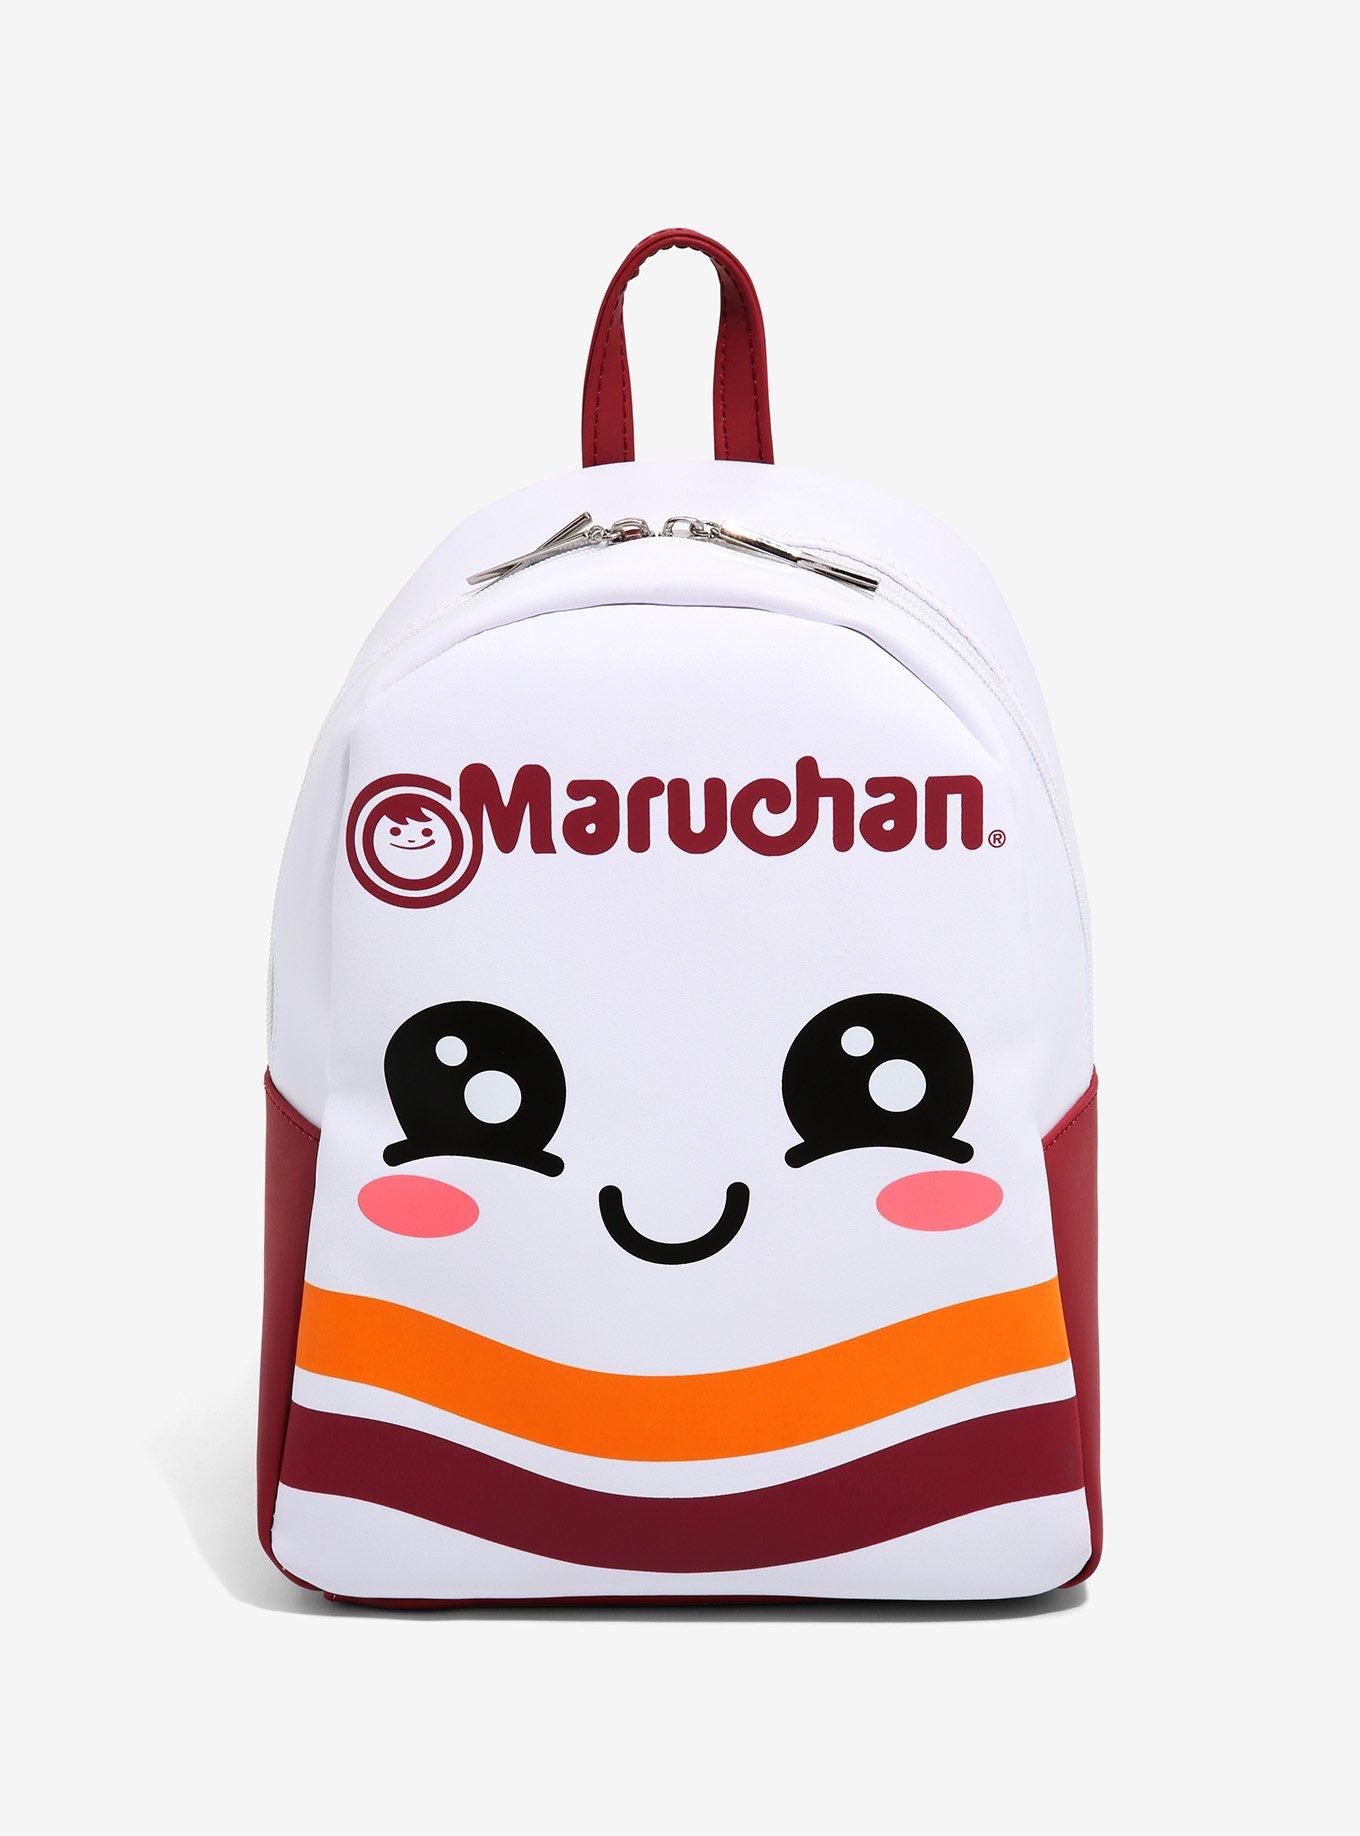 25 Cute Mini Backpacks that will Totally Make Your Outfit - Kawaii